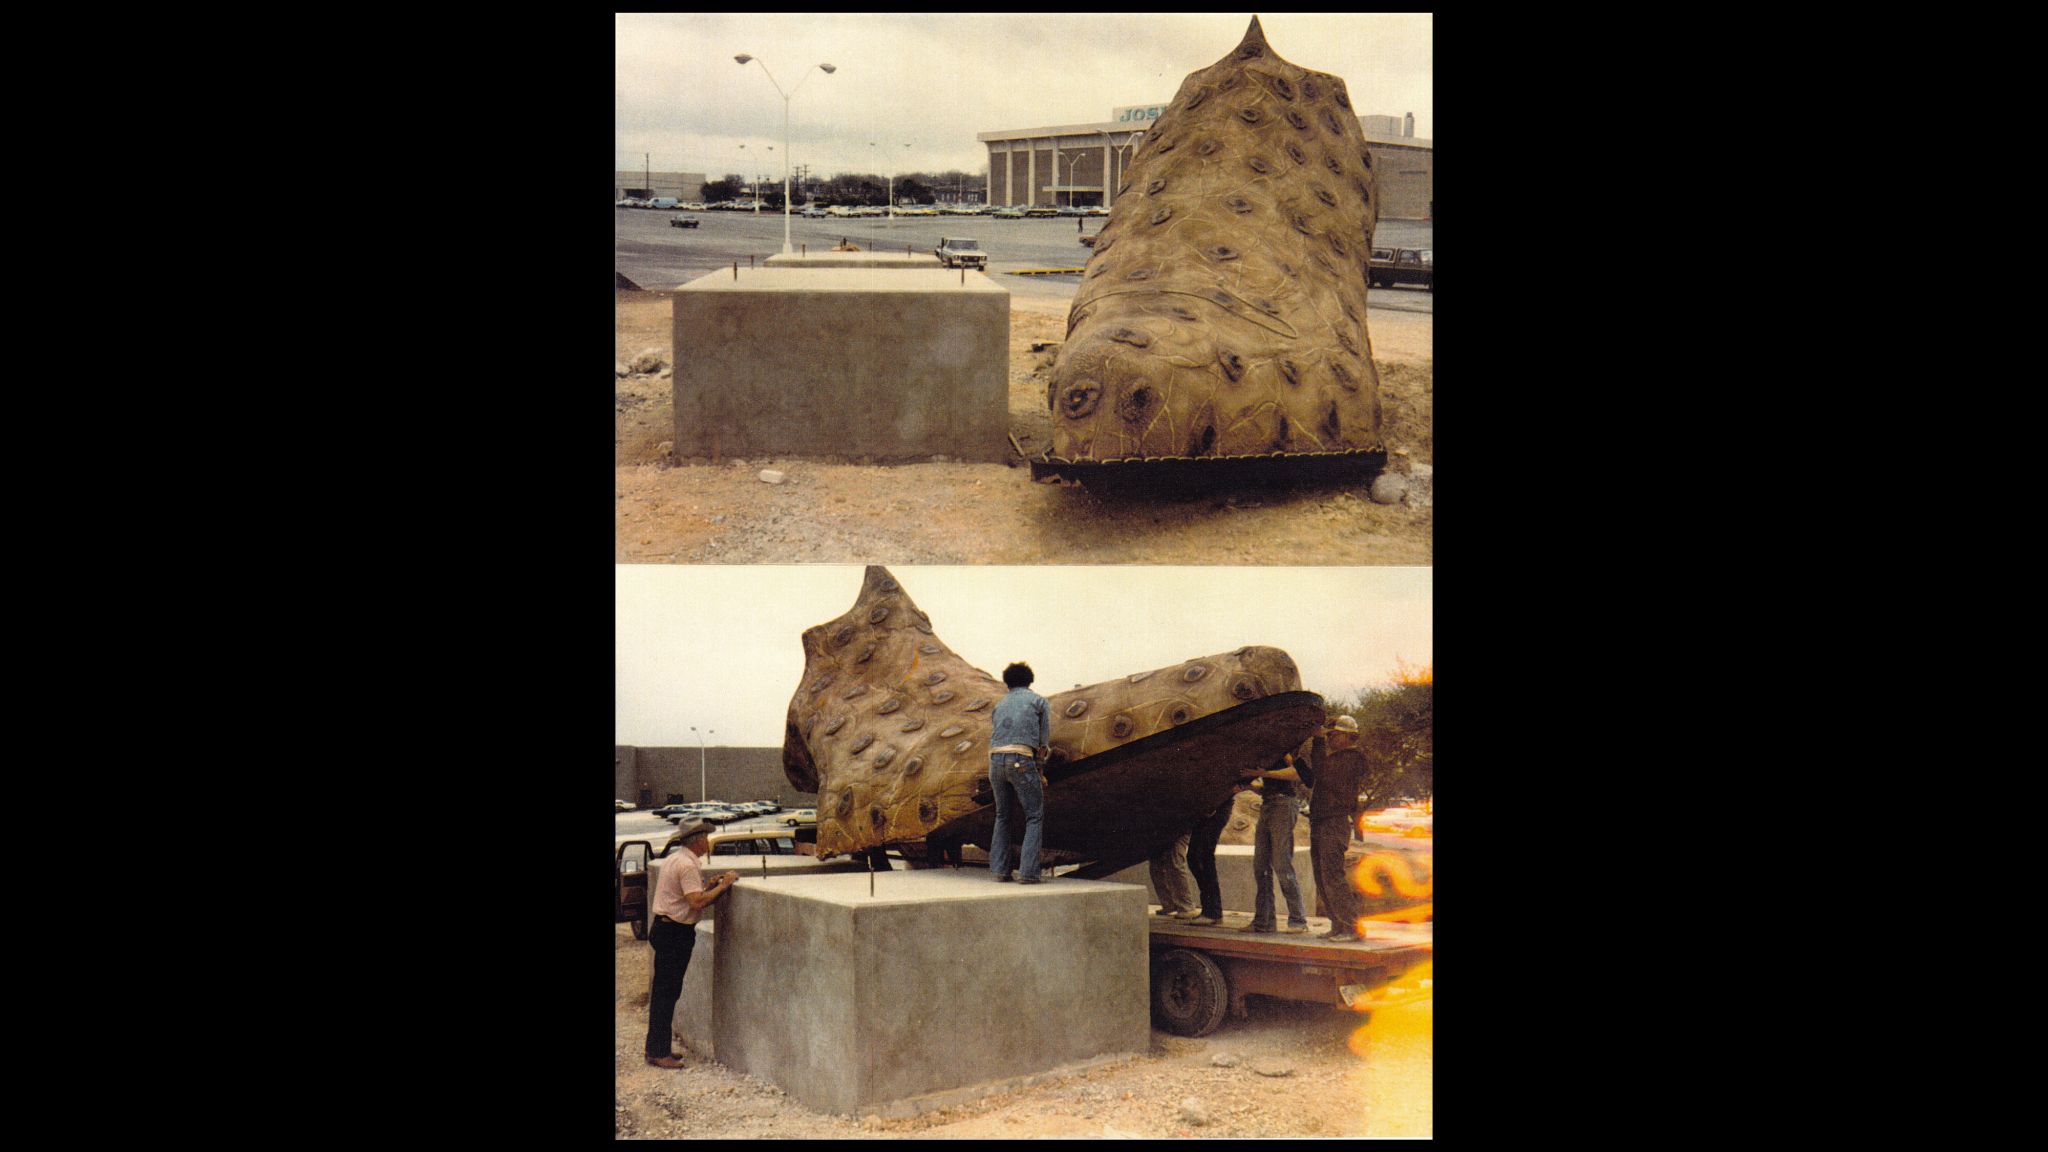 Iconic cowboy boots arrived at North Star Mall 43 years ago this week